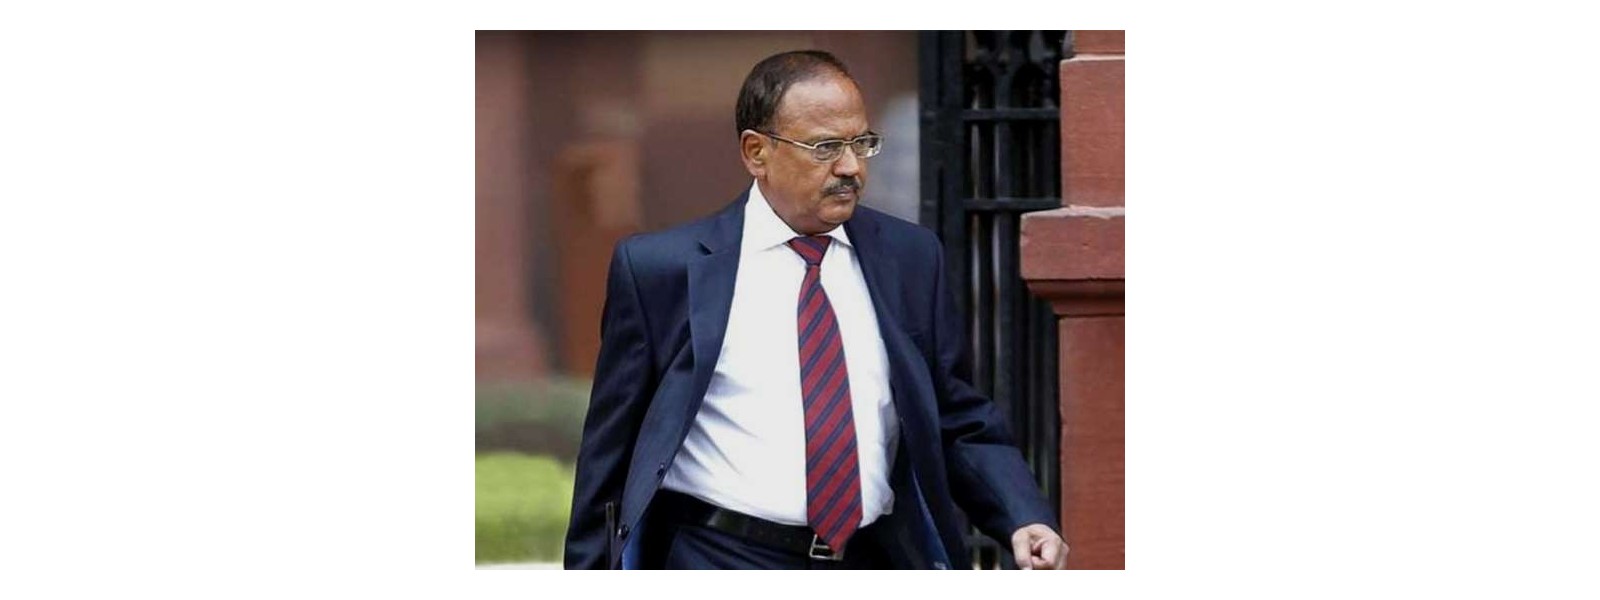 Indian National Security Adviser Ajit Doval in SL for Trilateral Meeting